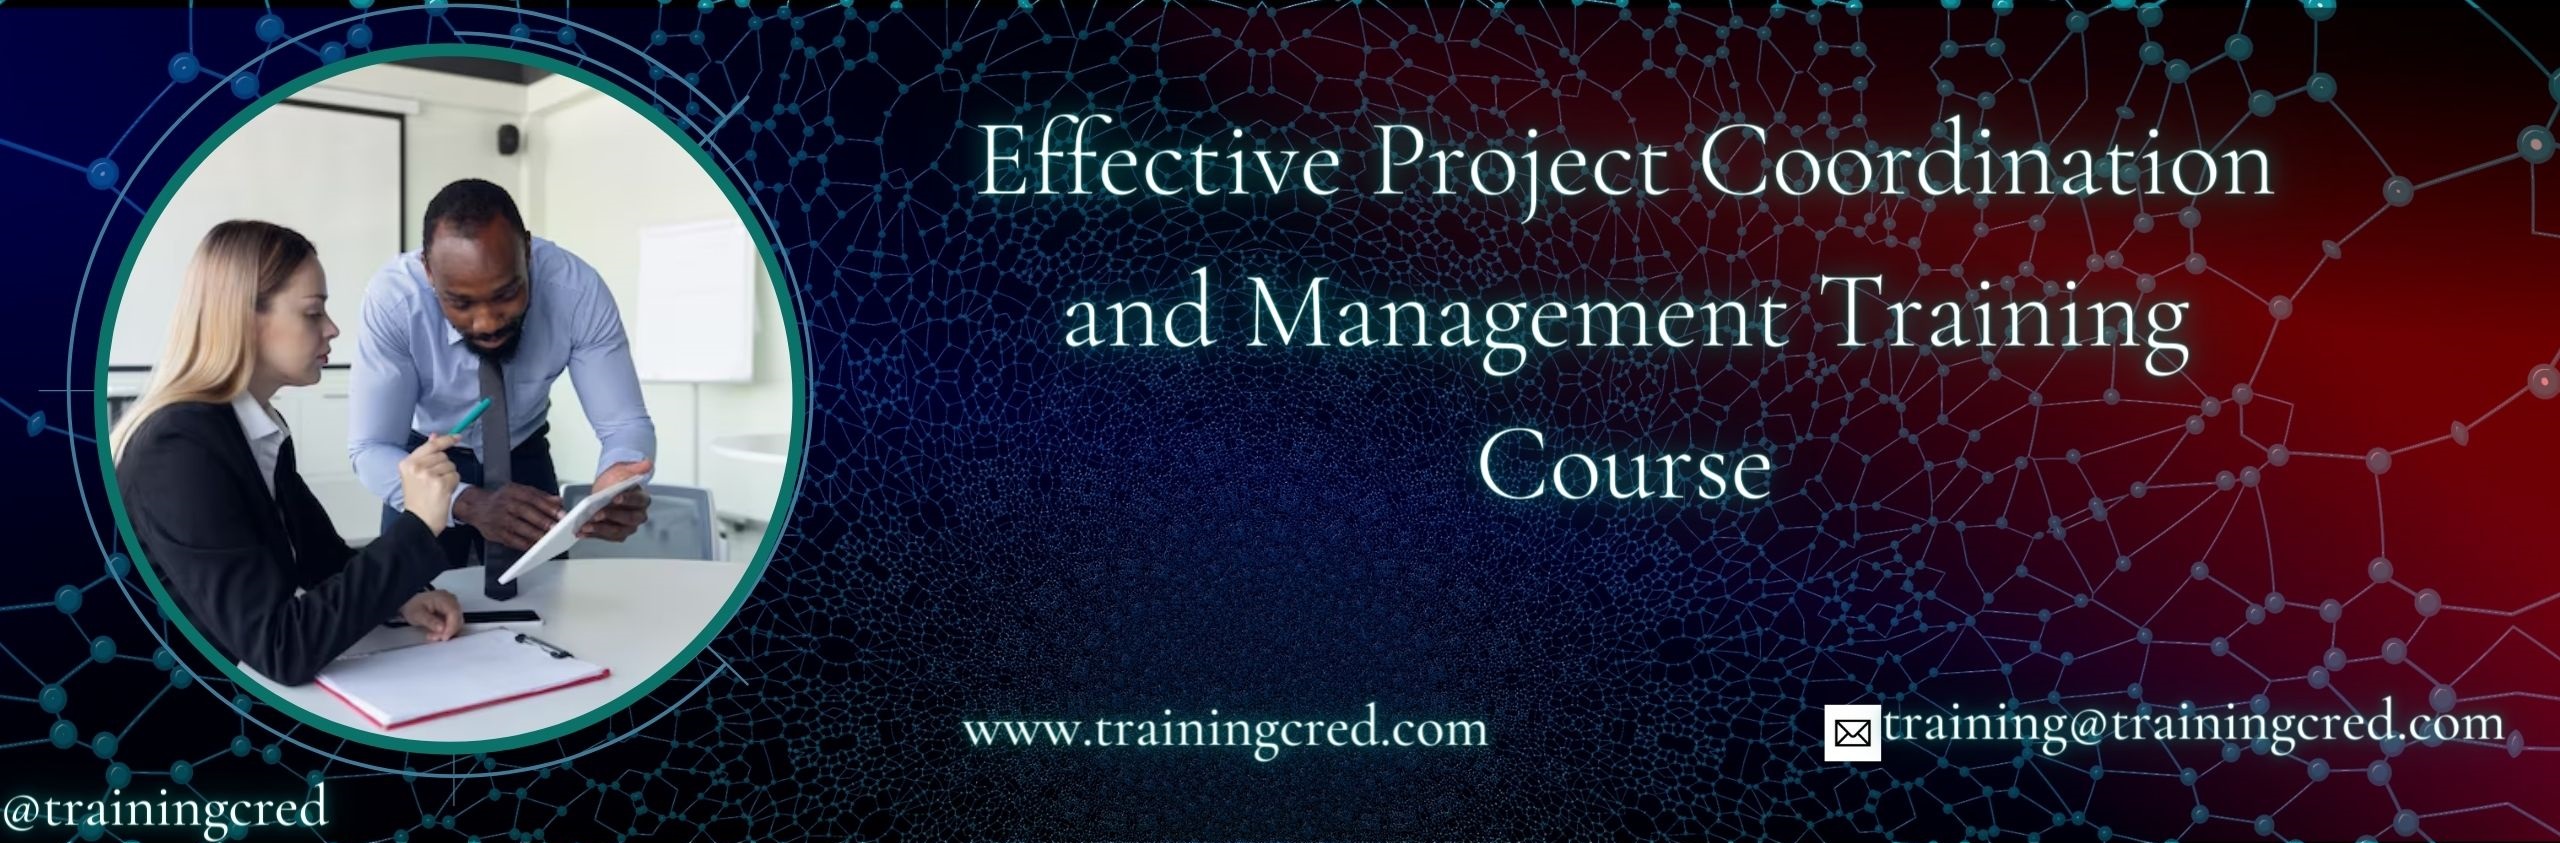 Effective Project Coordination and Management Training